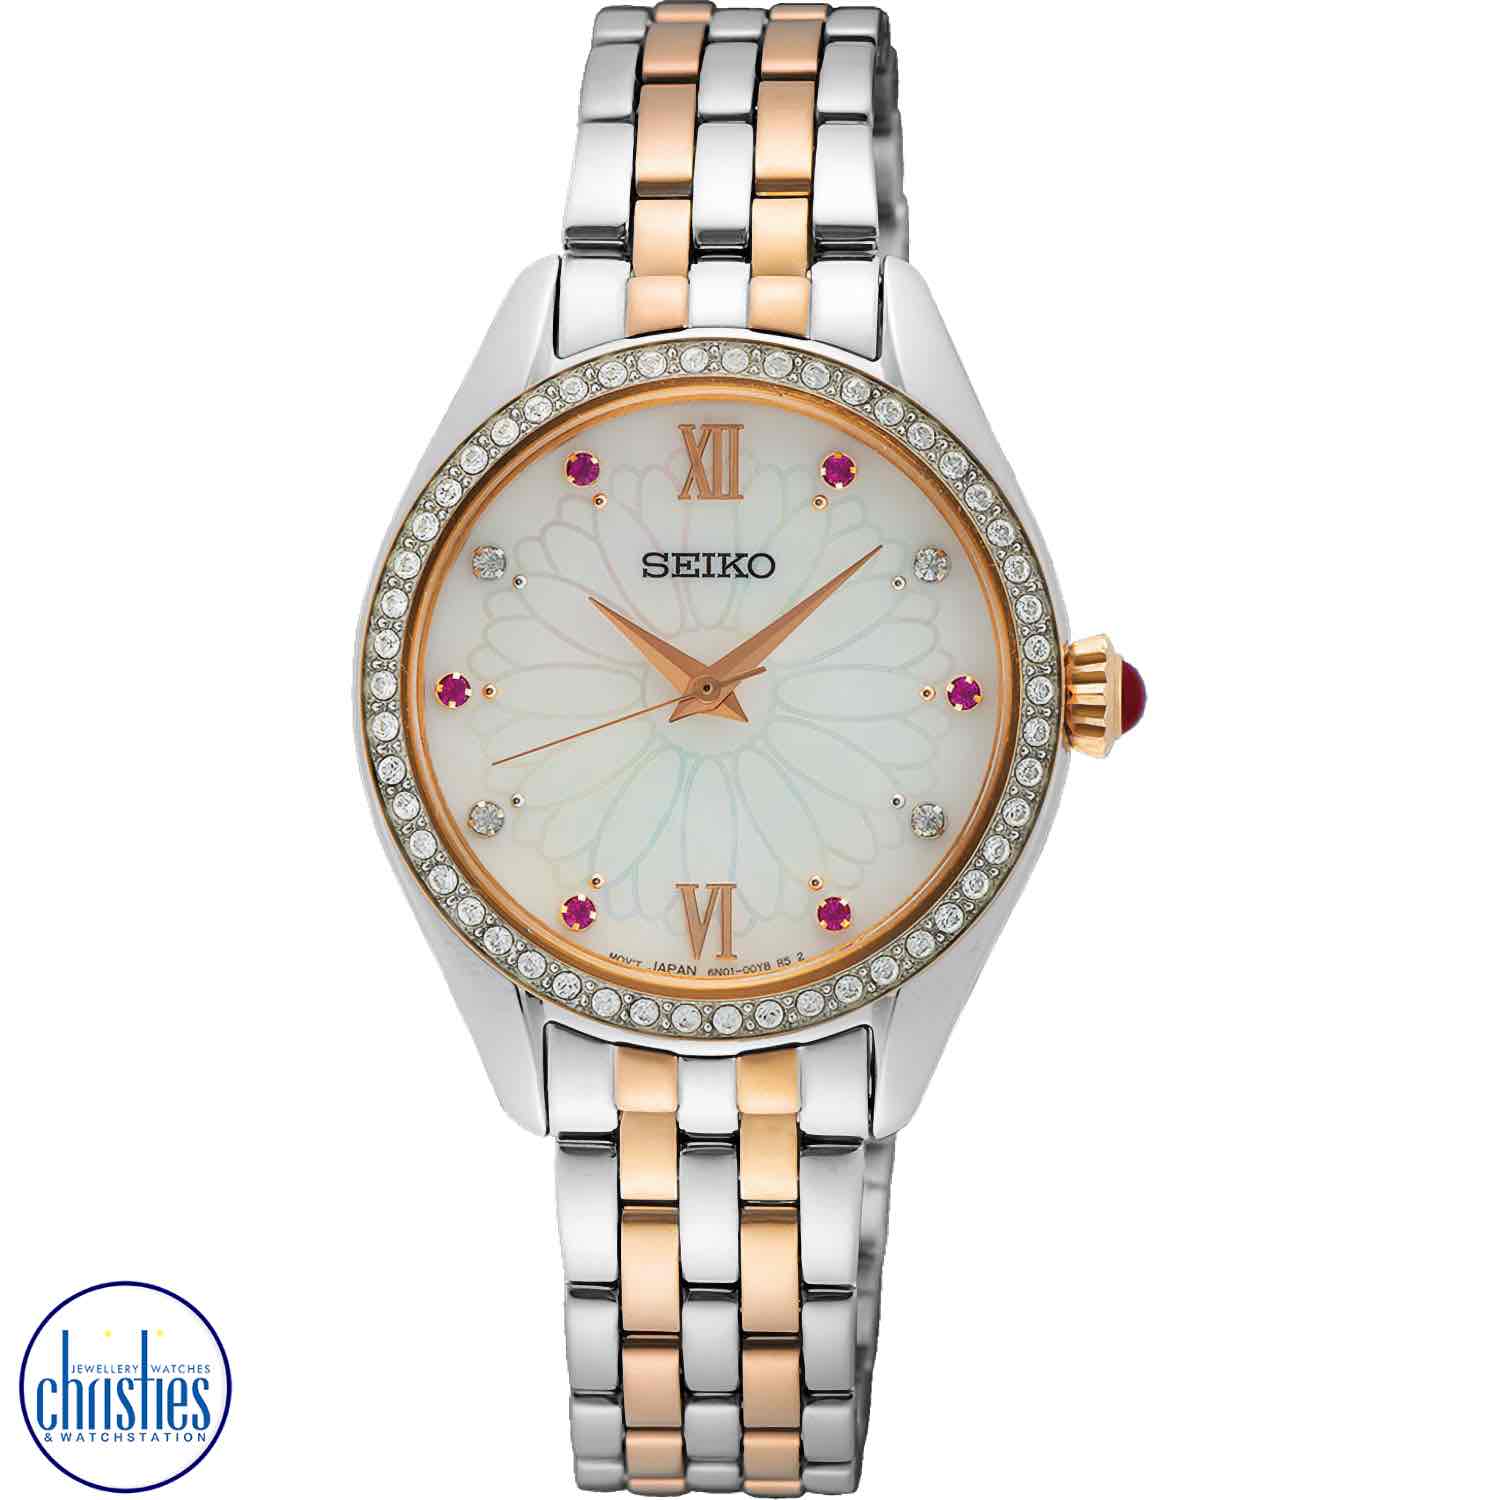 Experience the beauty and accuracy of the Seiko Quartz Analogue SUR542P, with its mother of pearl dial, crystal-set bezel, and stainless steel case with rose gold finish. Get yours today and add a touch of elegance to your wardrobe.